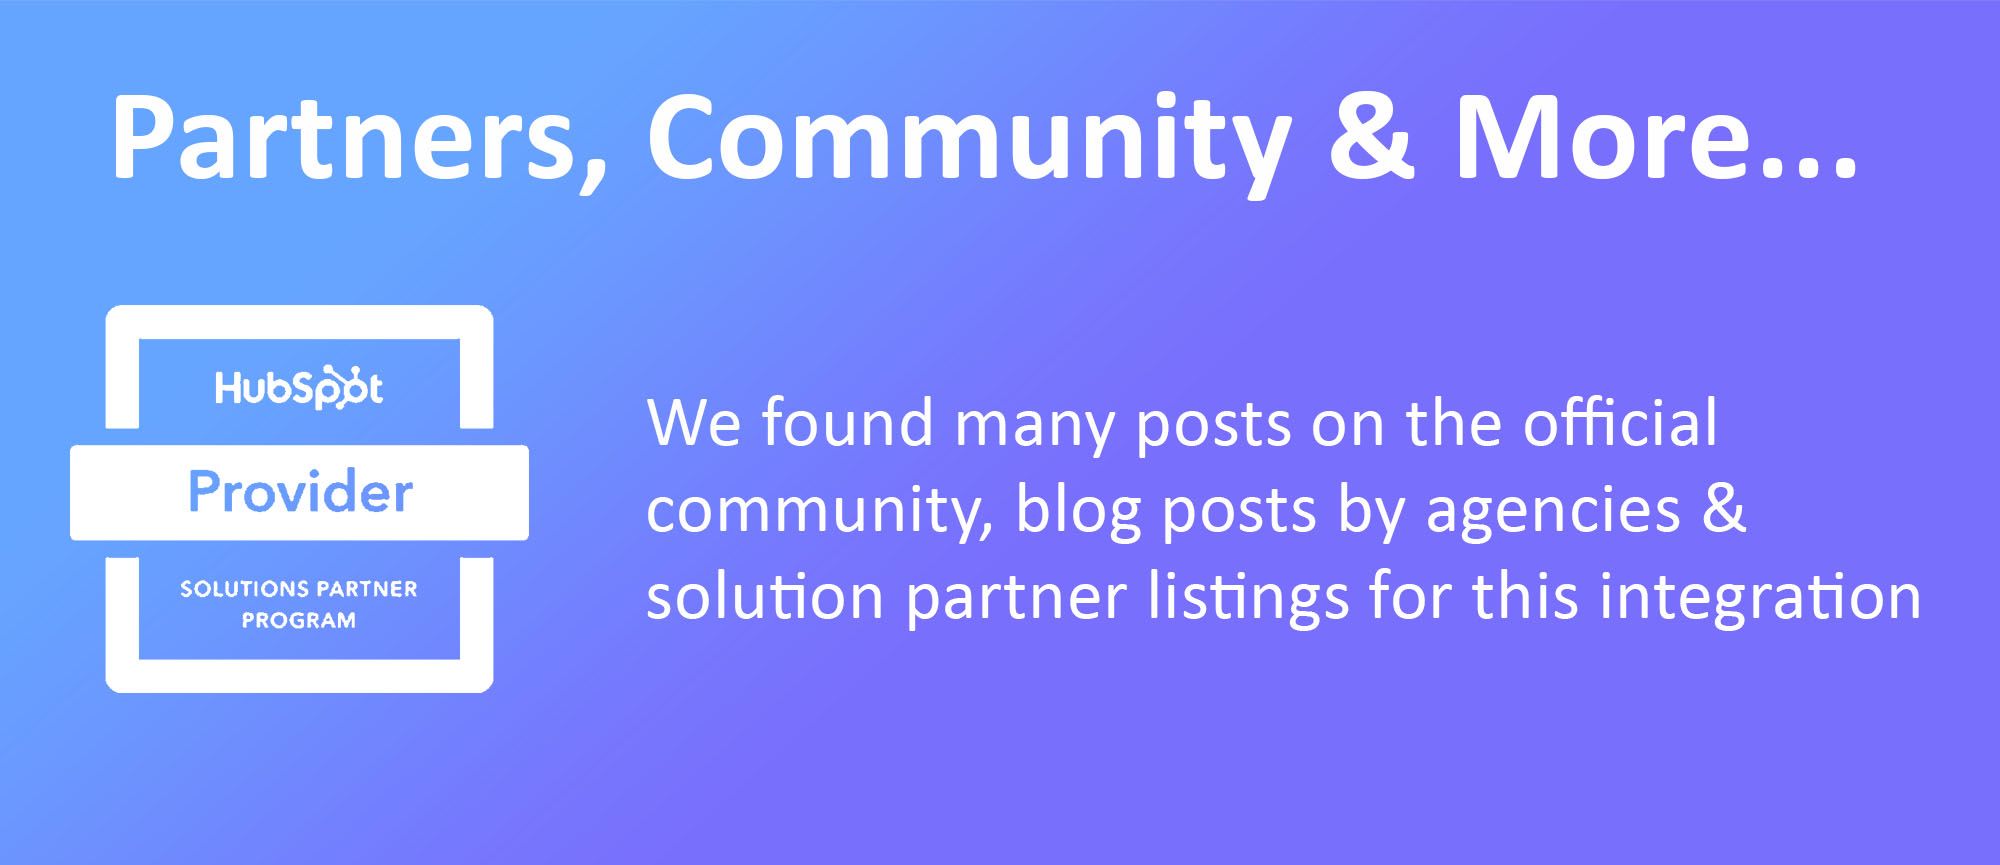 Partners, community & more resources for connecting HubSpot with SharePoint